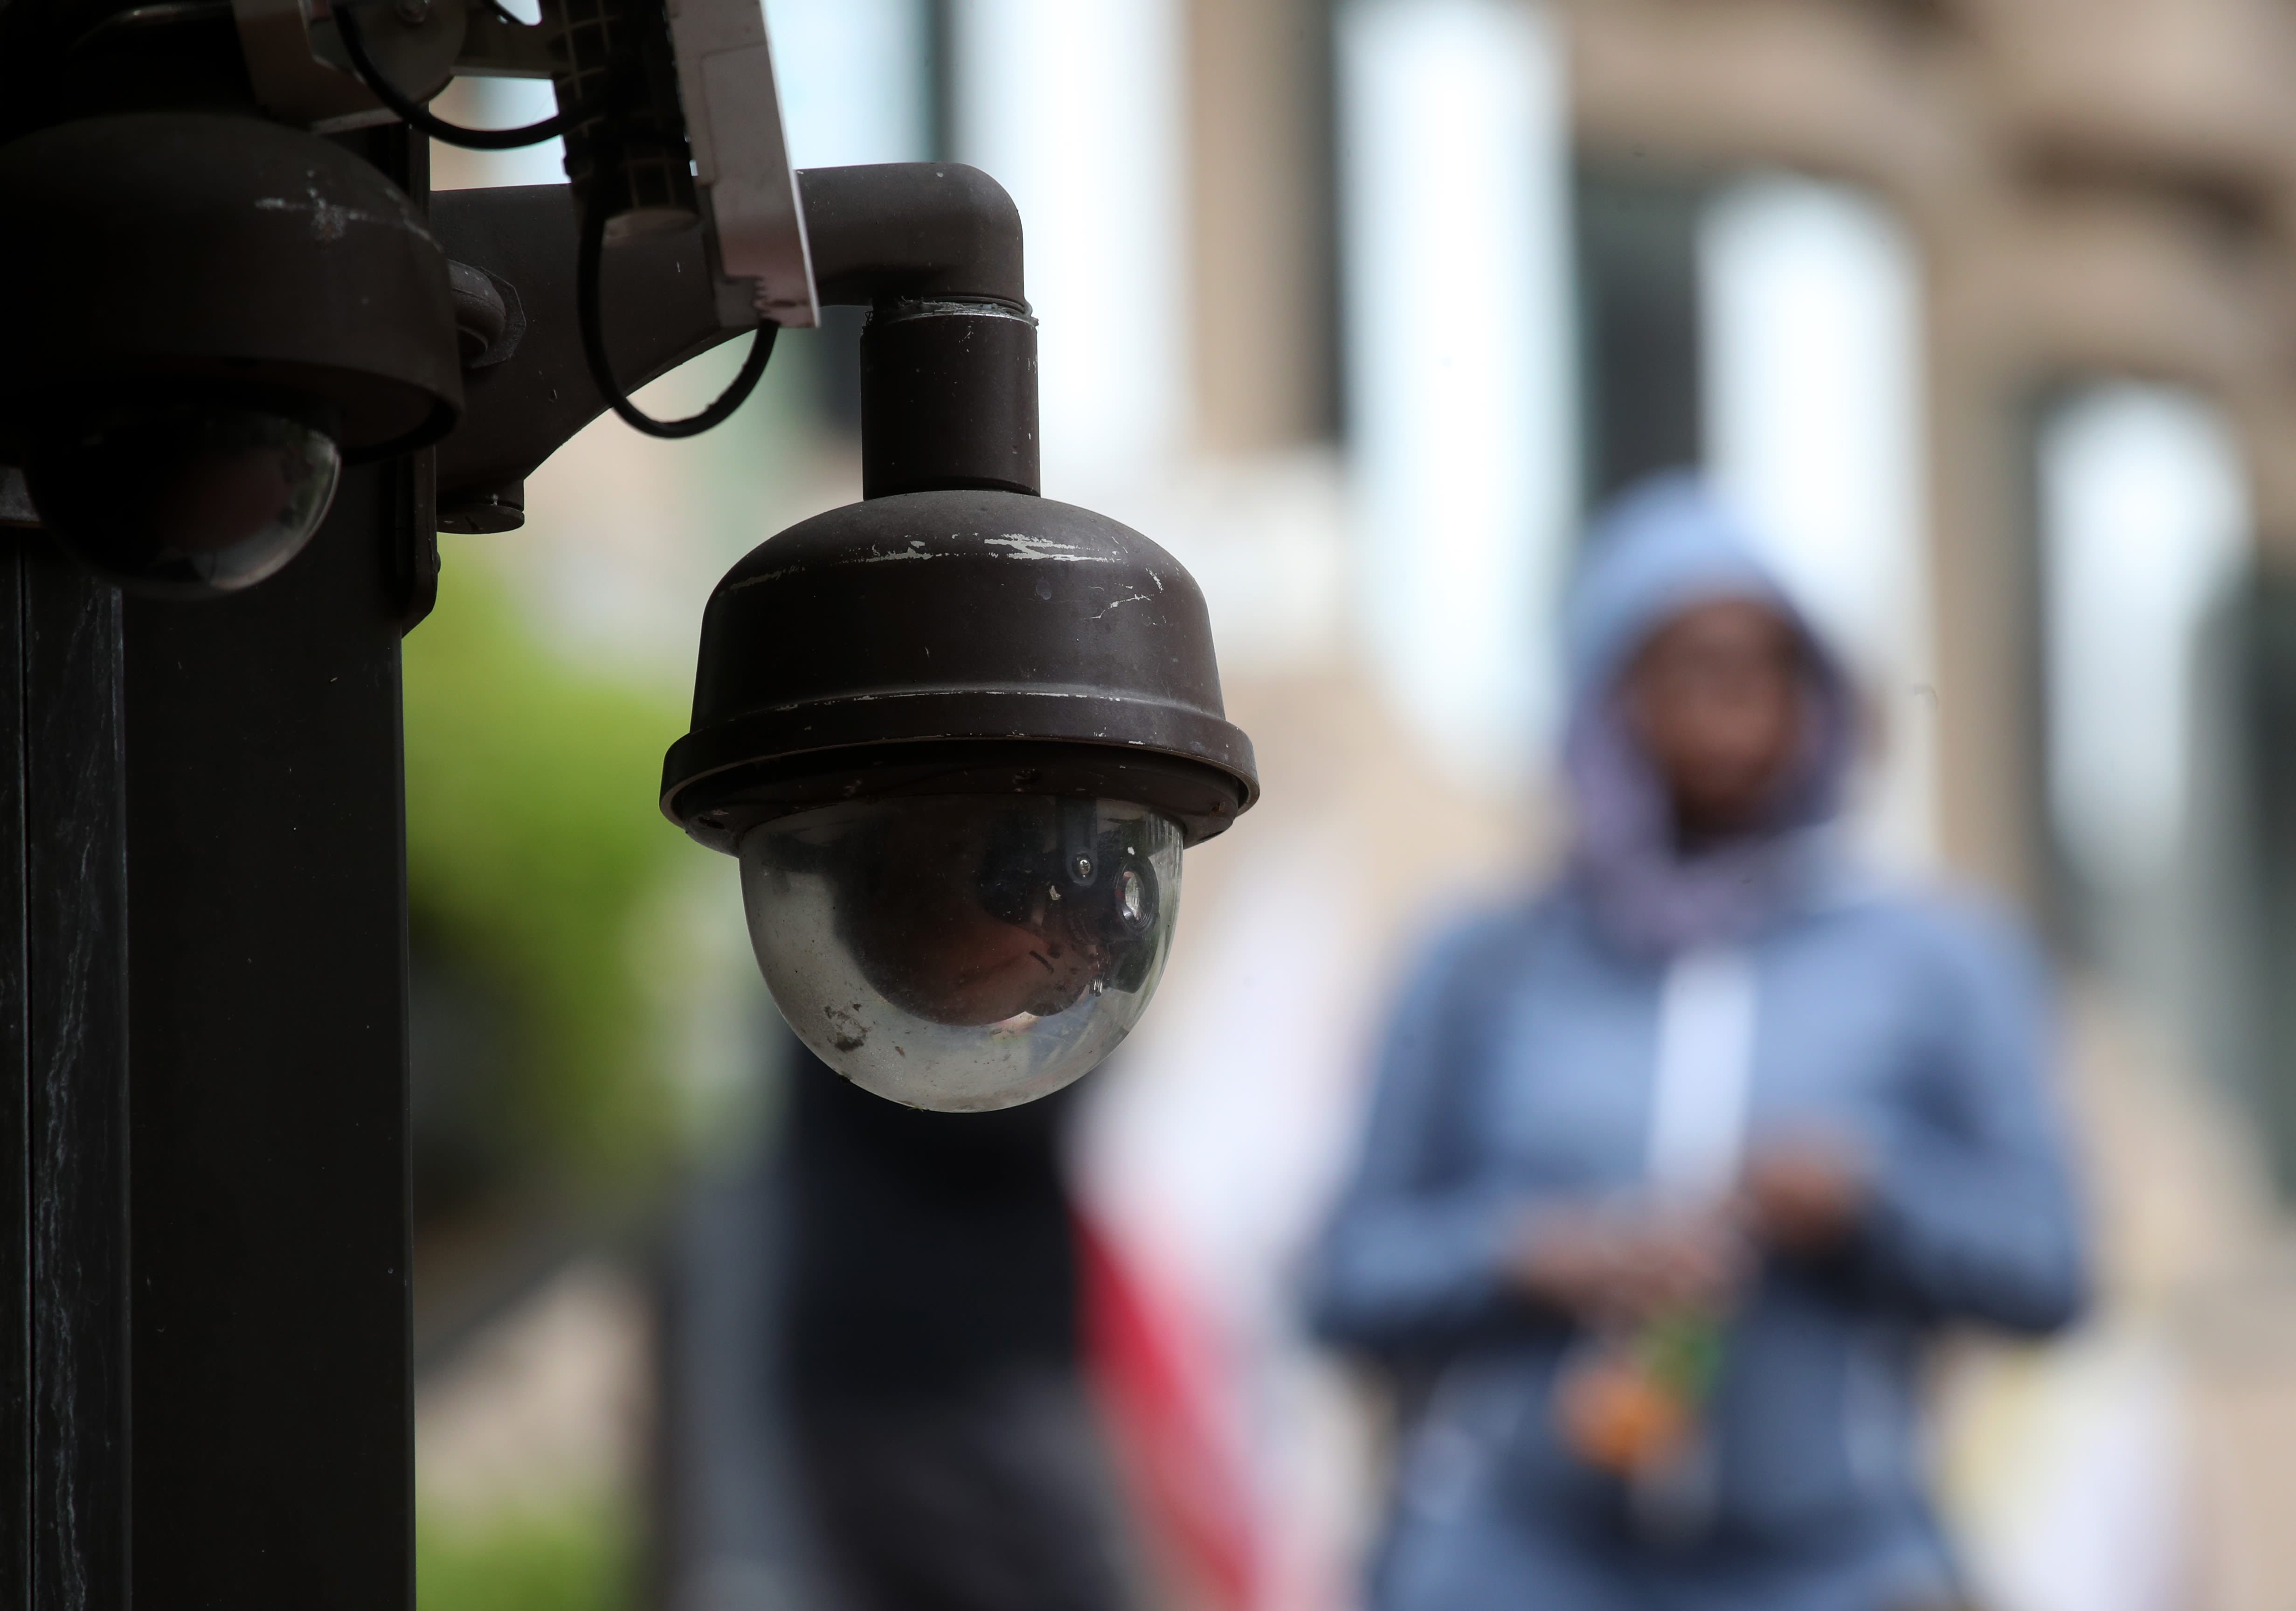 These cities bar facial recognition tech. Police still found ways to access it.